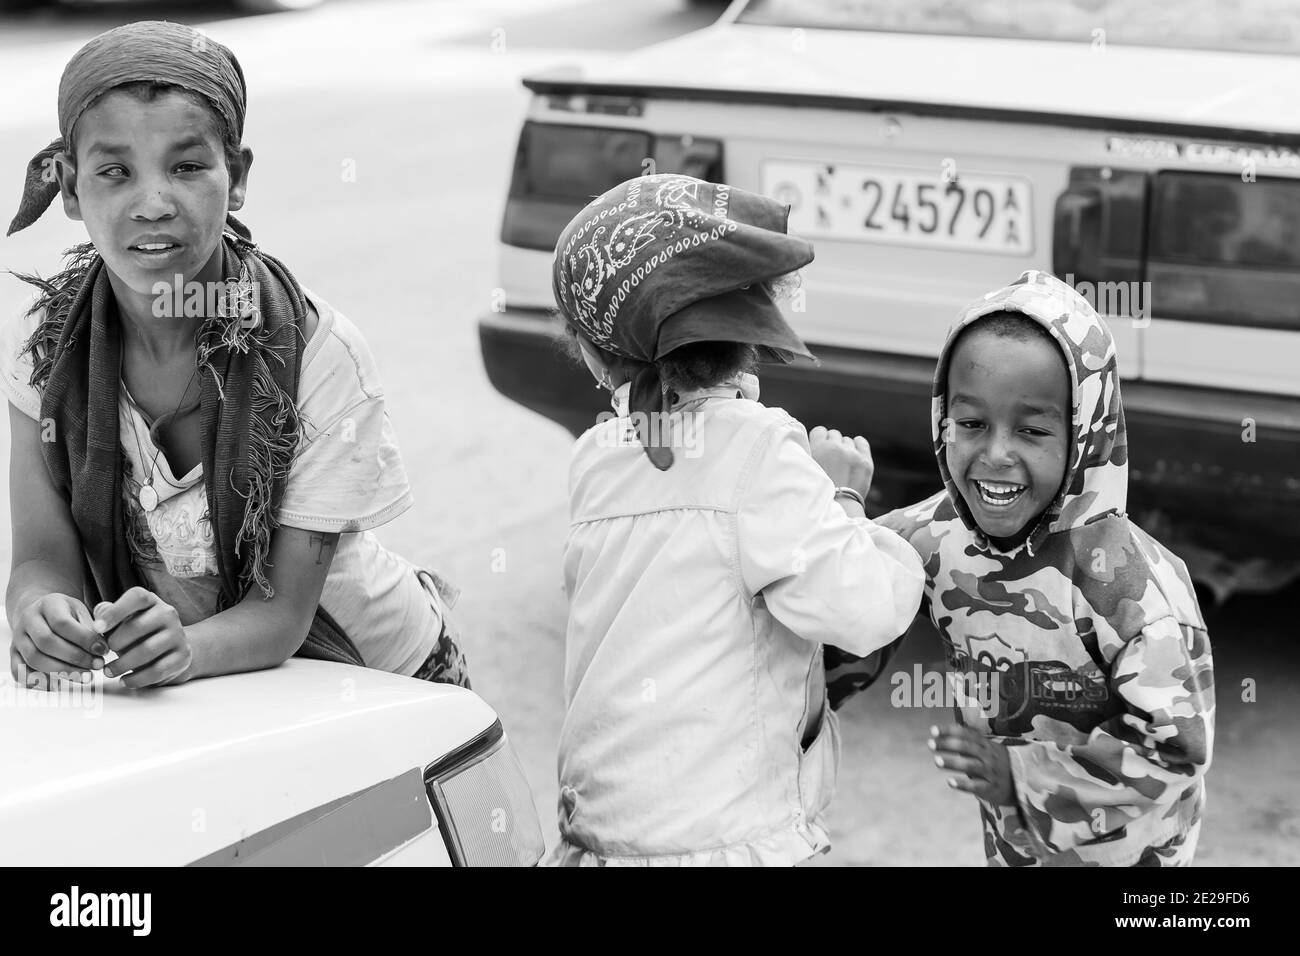 ADDIS ABABA, ETHIOPIA - Jan 05, 2021: Addis Ababa, Ethiopia, January 27, 2014, Three small orphan street kids playing and laughing on a quite city roa Stock Photo